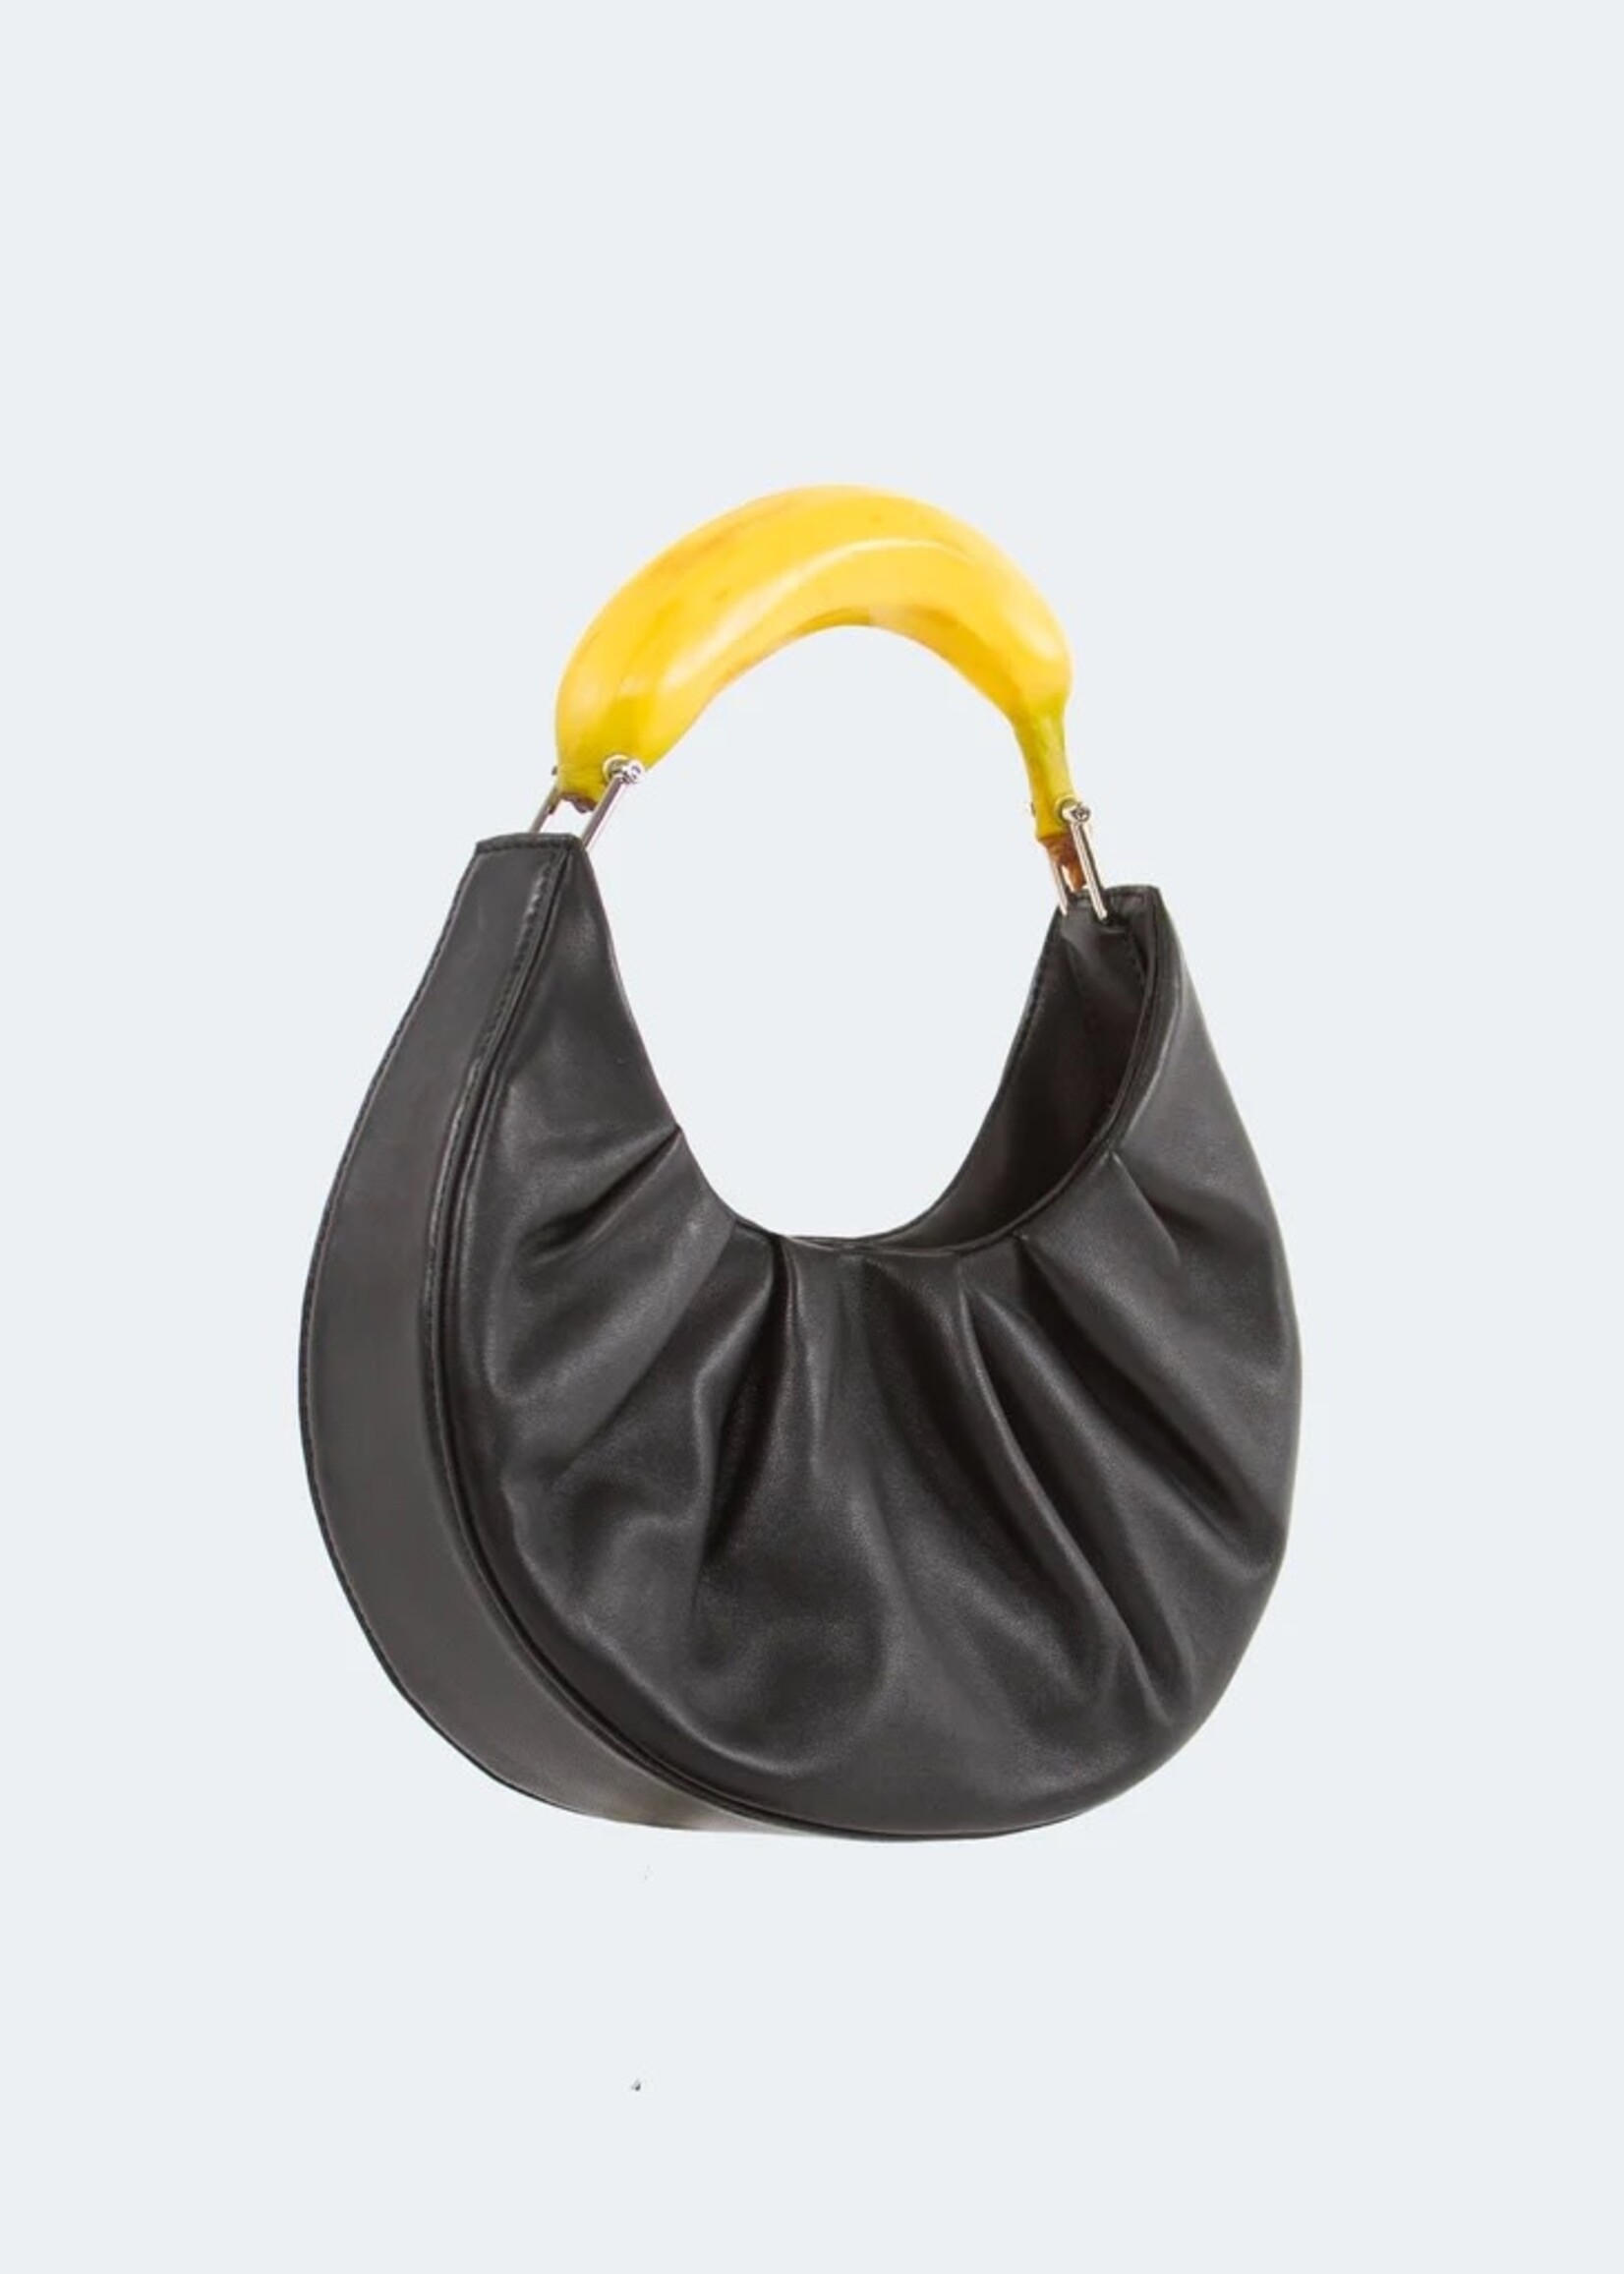 PUPPETS AND PUPPETS Banana Hobo Bag in Black Leather